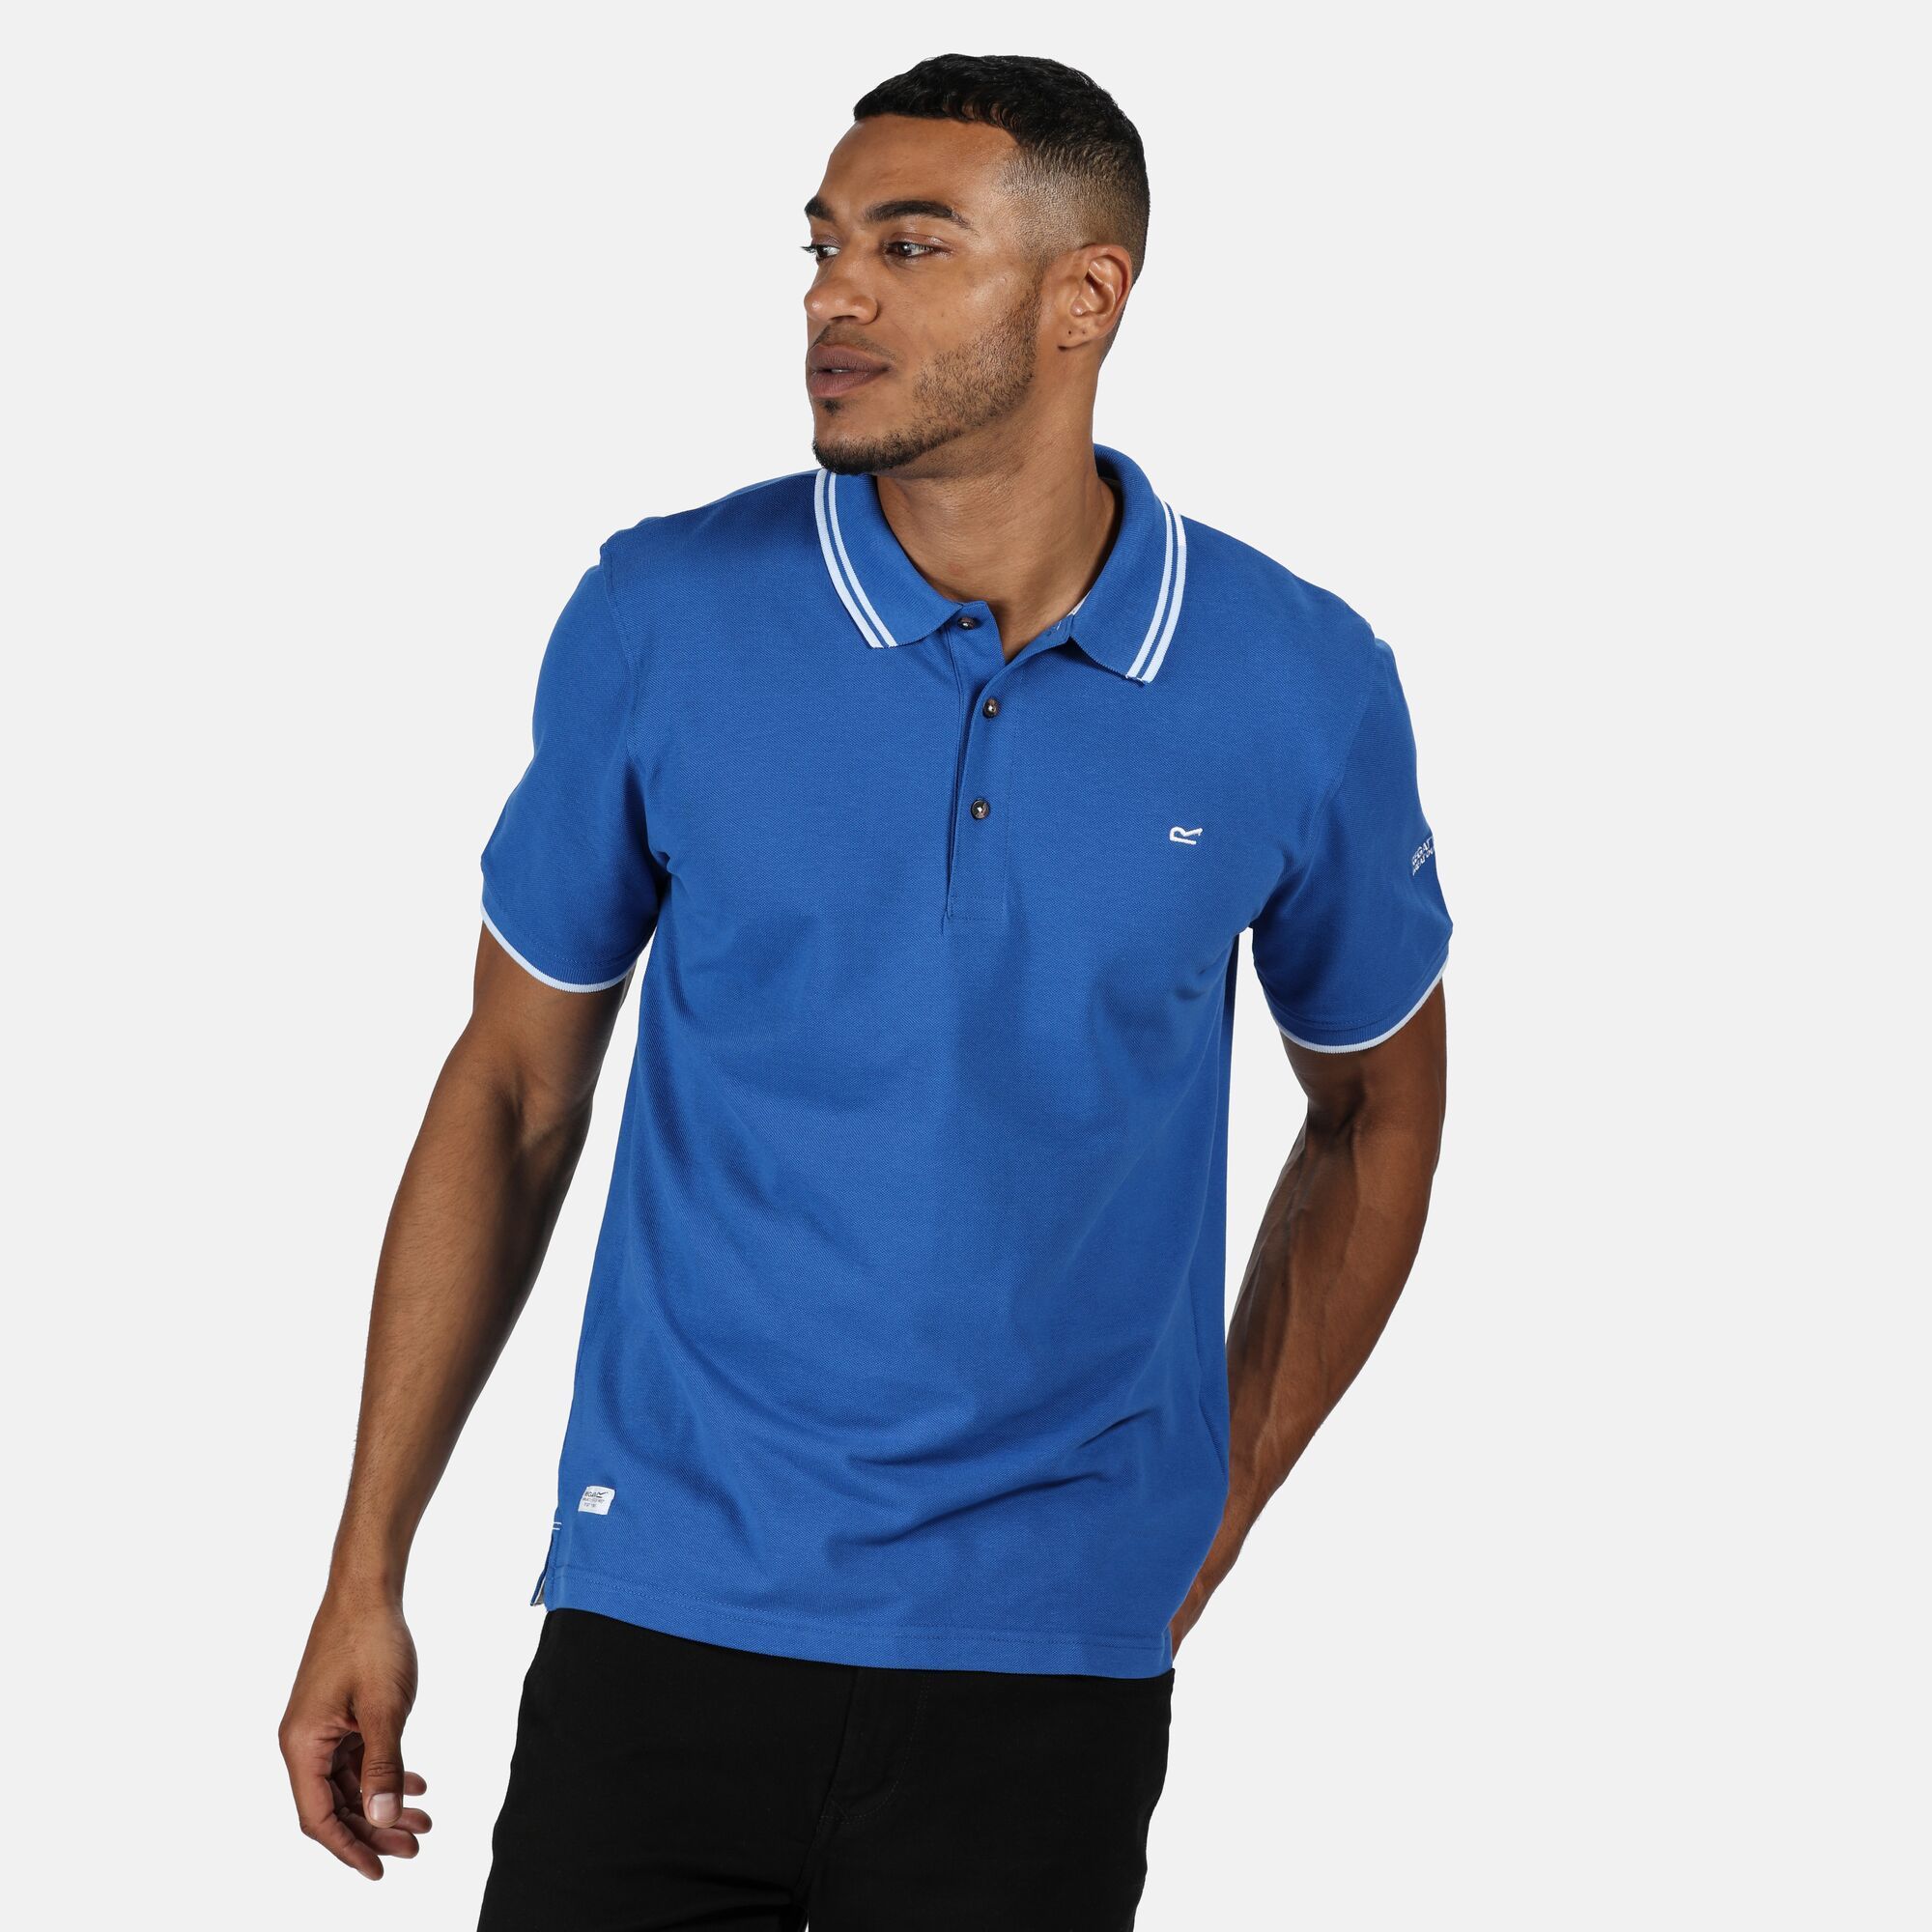 100% Coolweave cotton pique. Ribbed collar and cuffs. 3 button placket dyed to match buttons. Cut from naturally breathable Coolweave Cotton pique with sporty side slits for a comfortable fit.